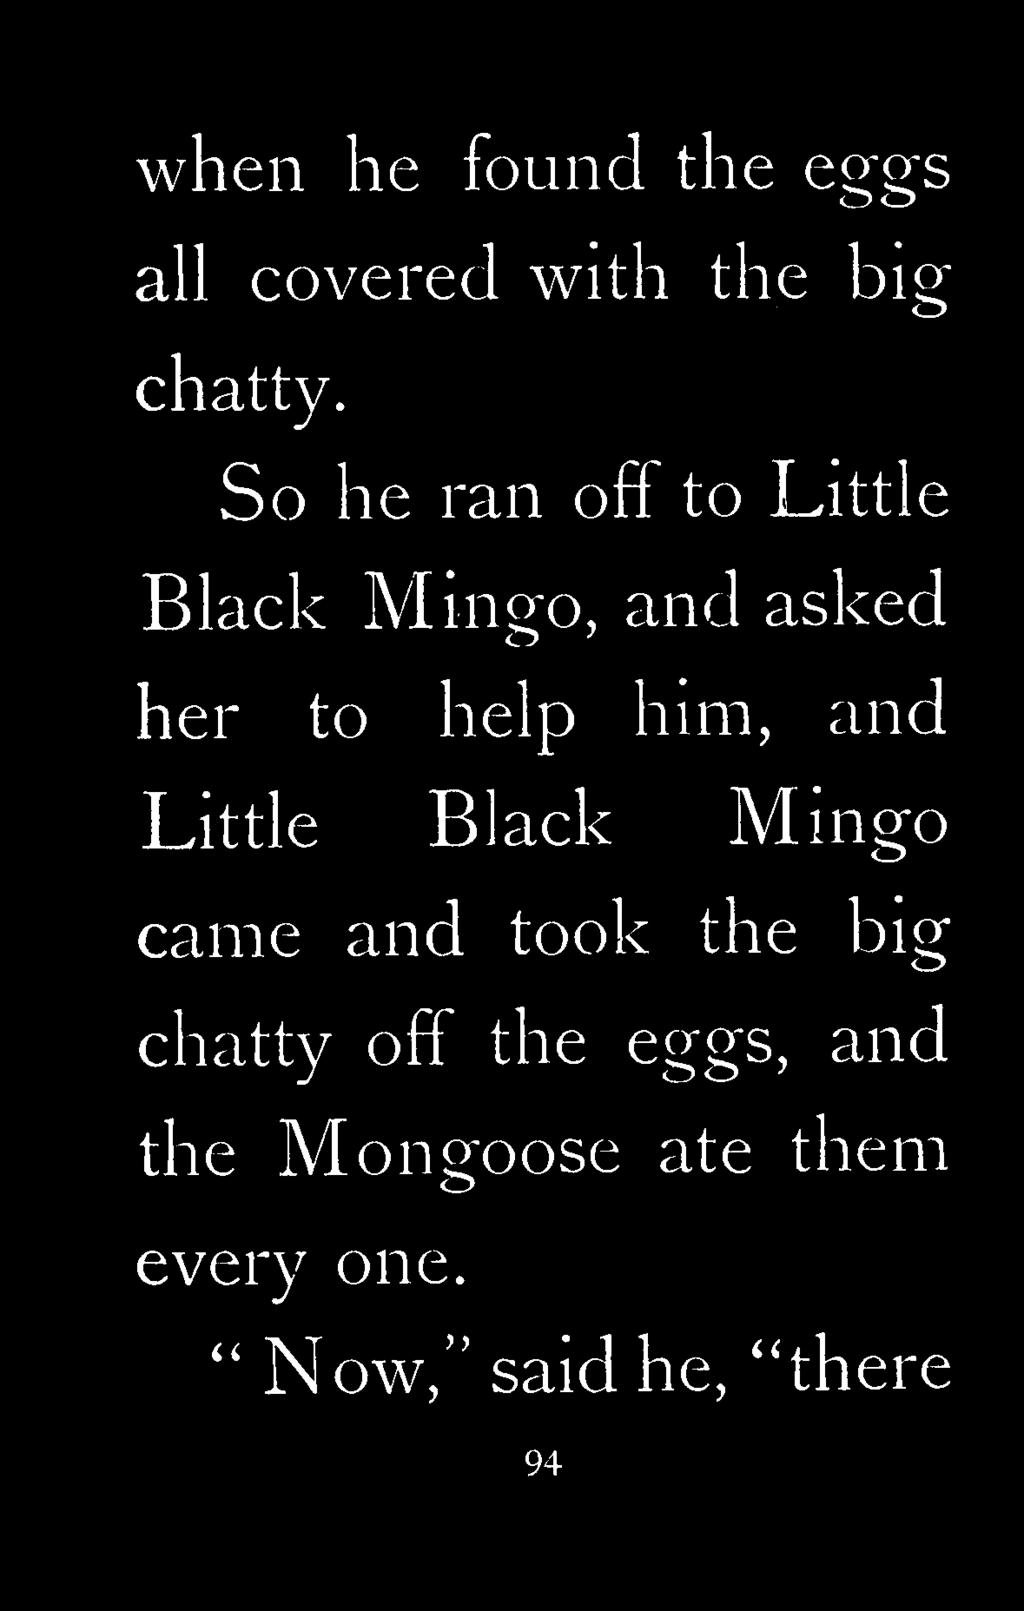 him, and Little Black Mingo came and took the bio - O chatty